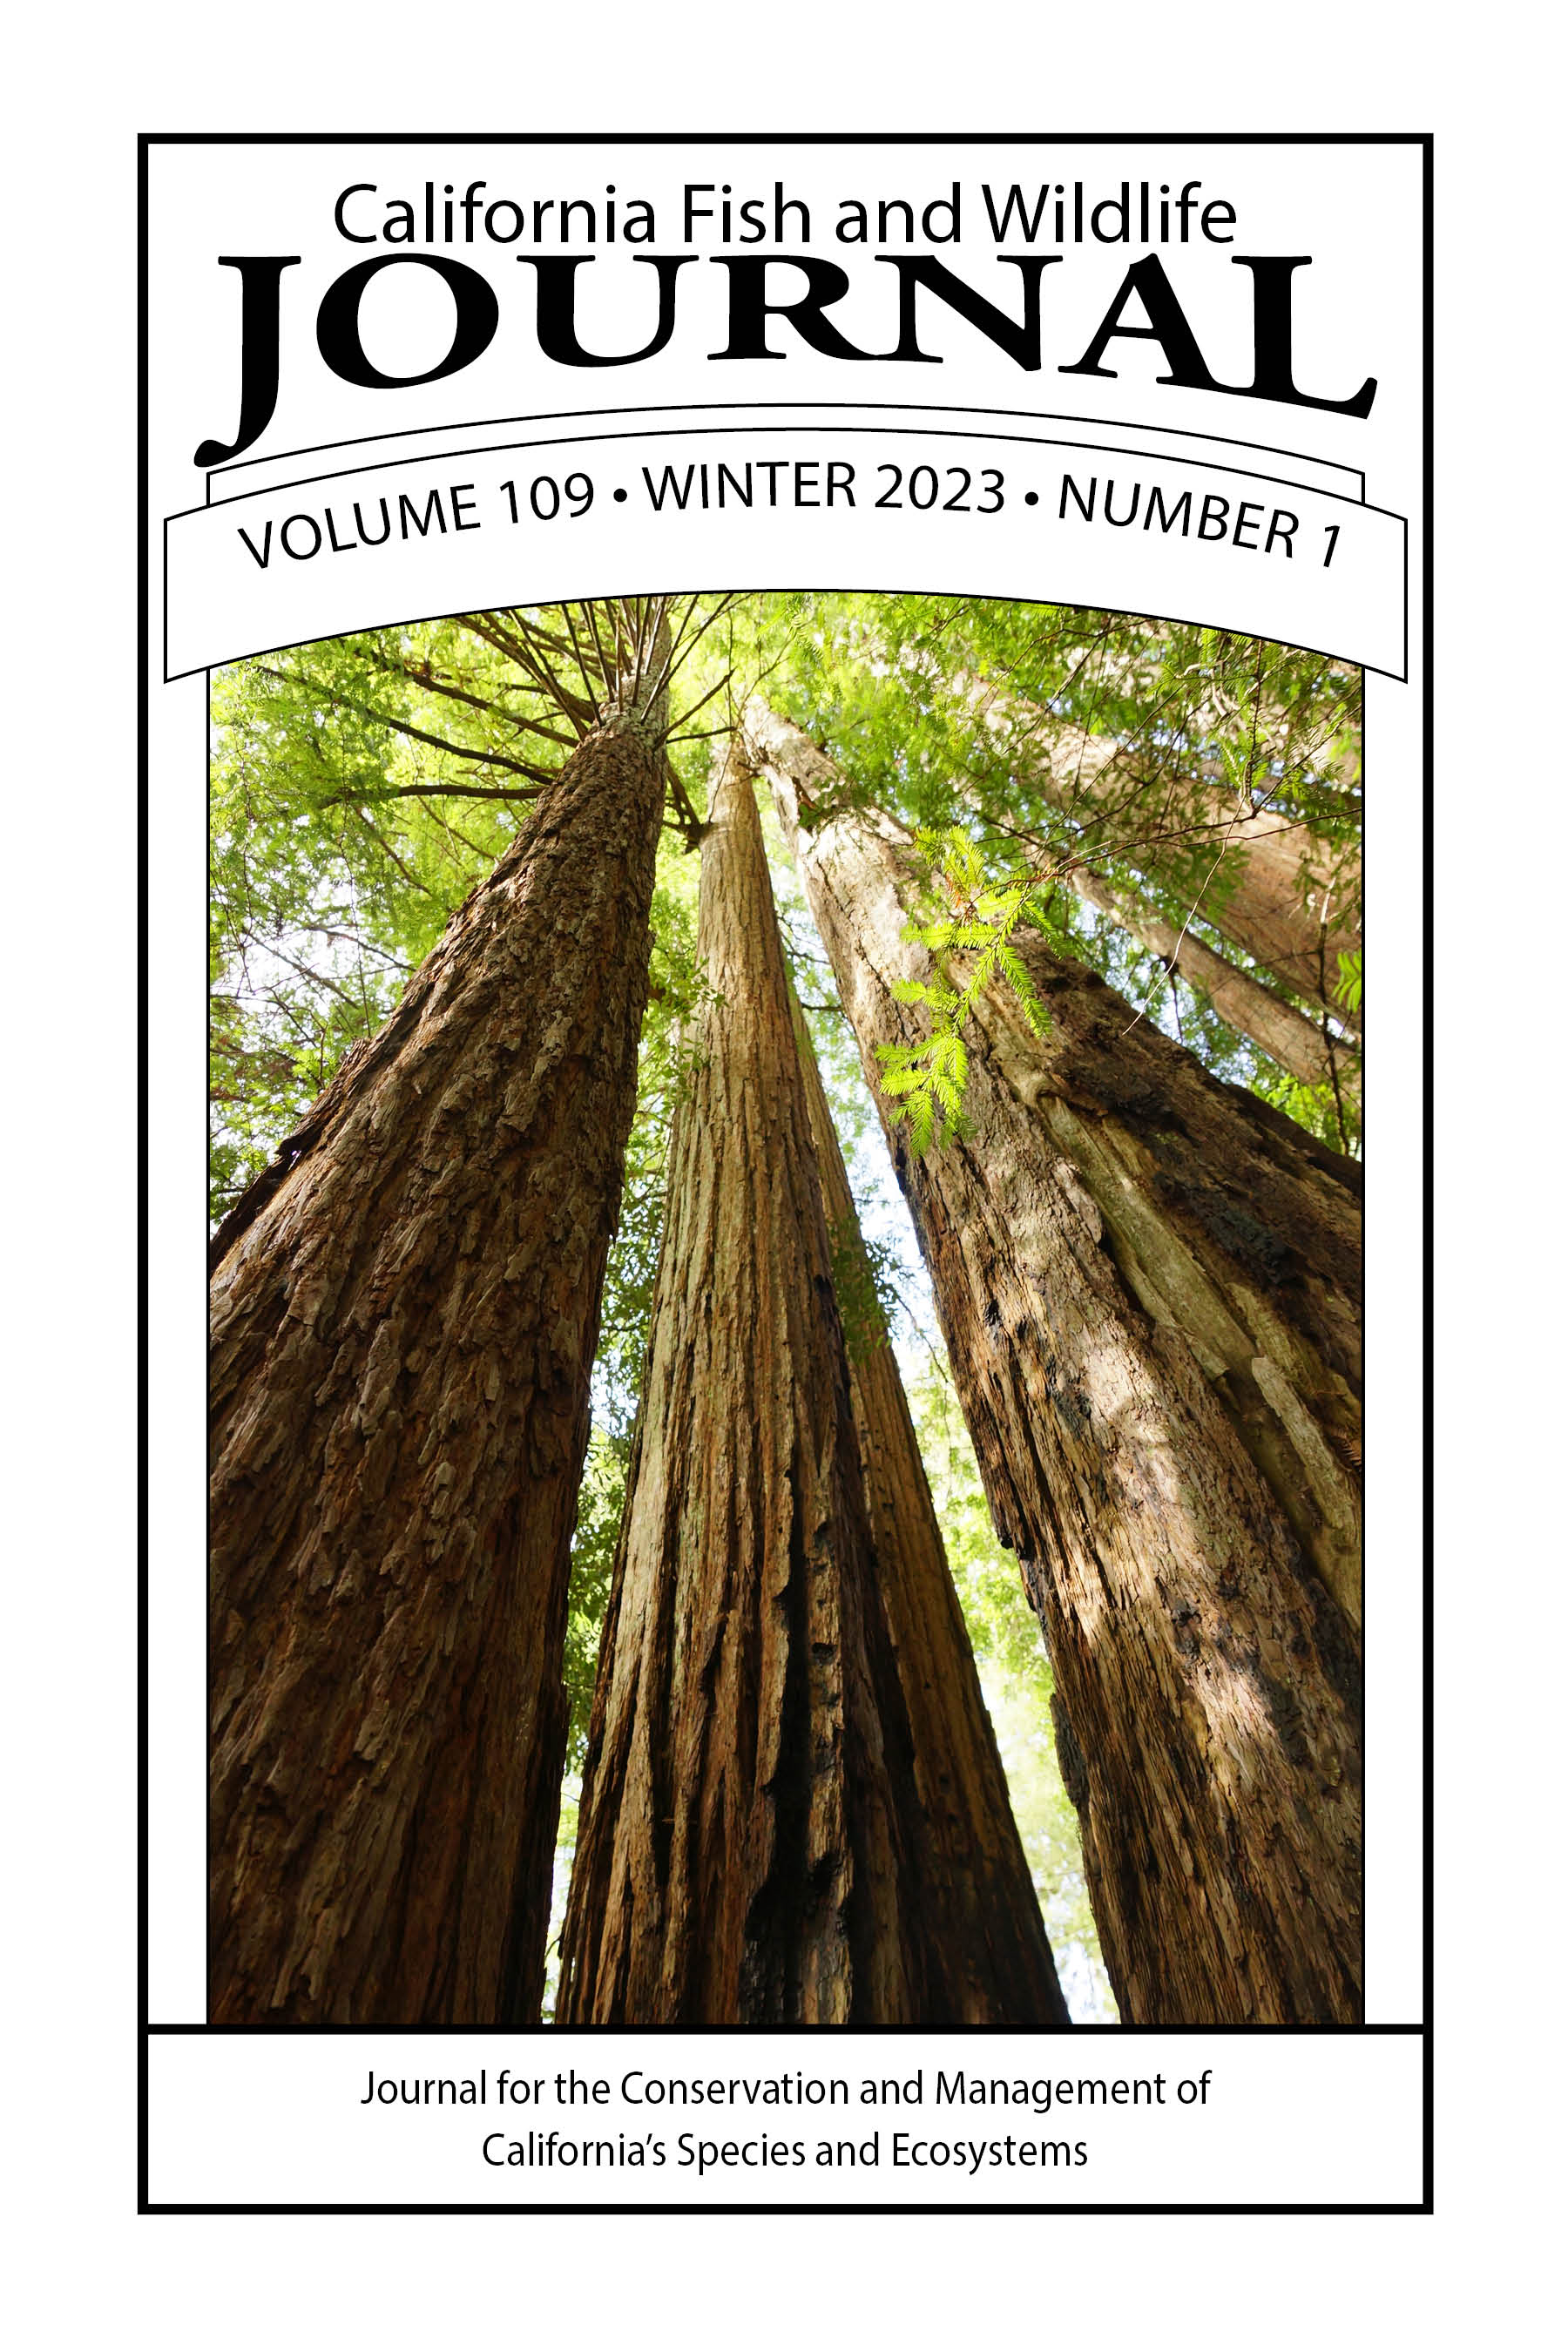 109-1 Cover - Photo looking up of large redwood trees in Big Basin Redwoods State Park